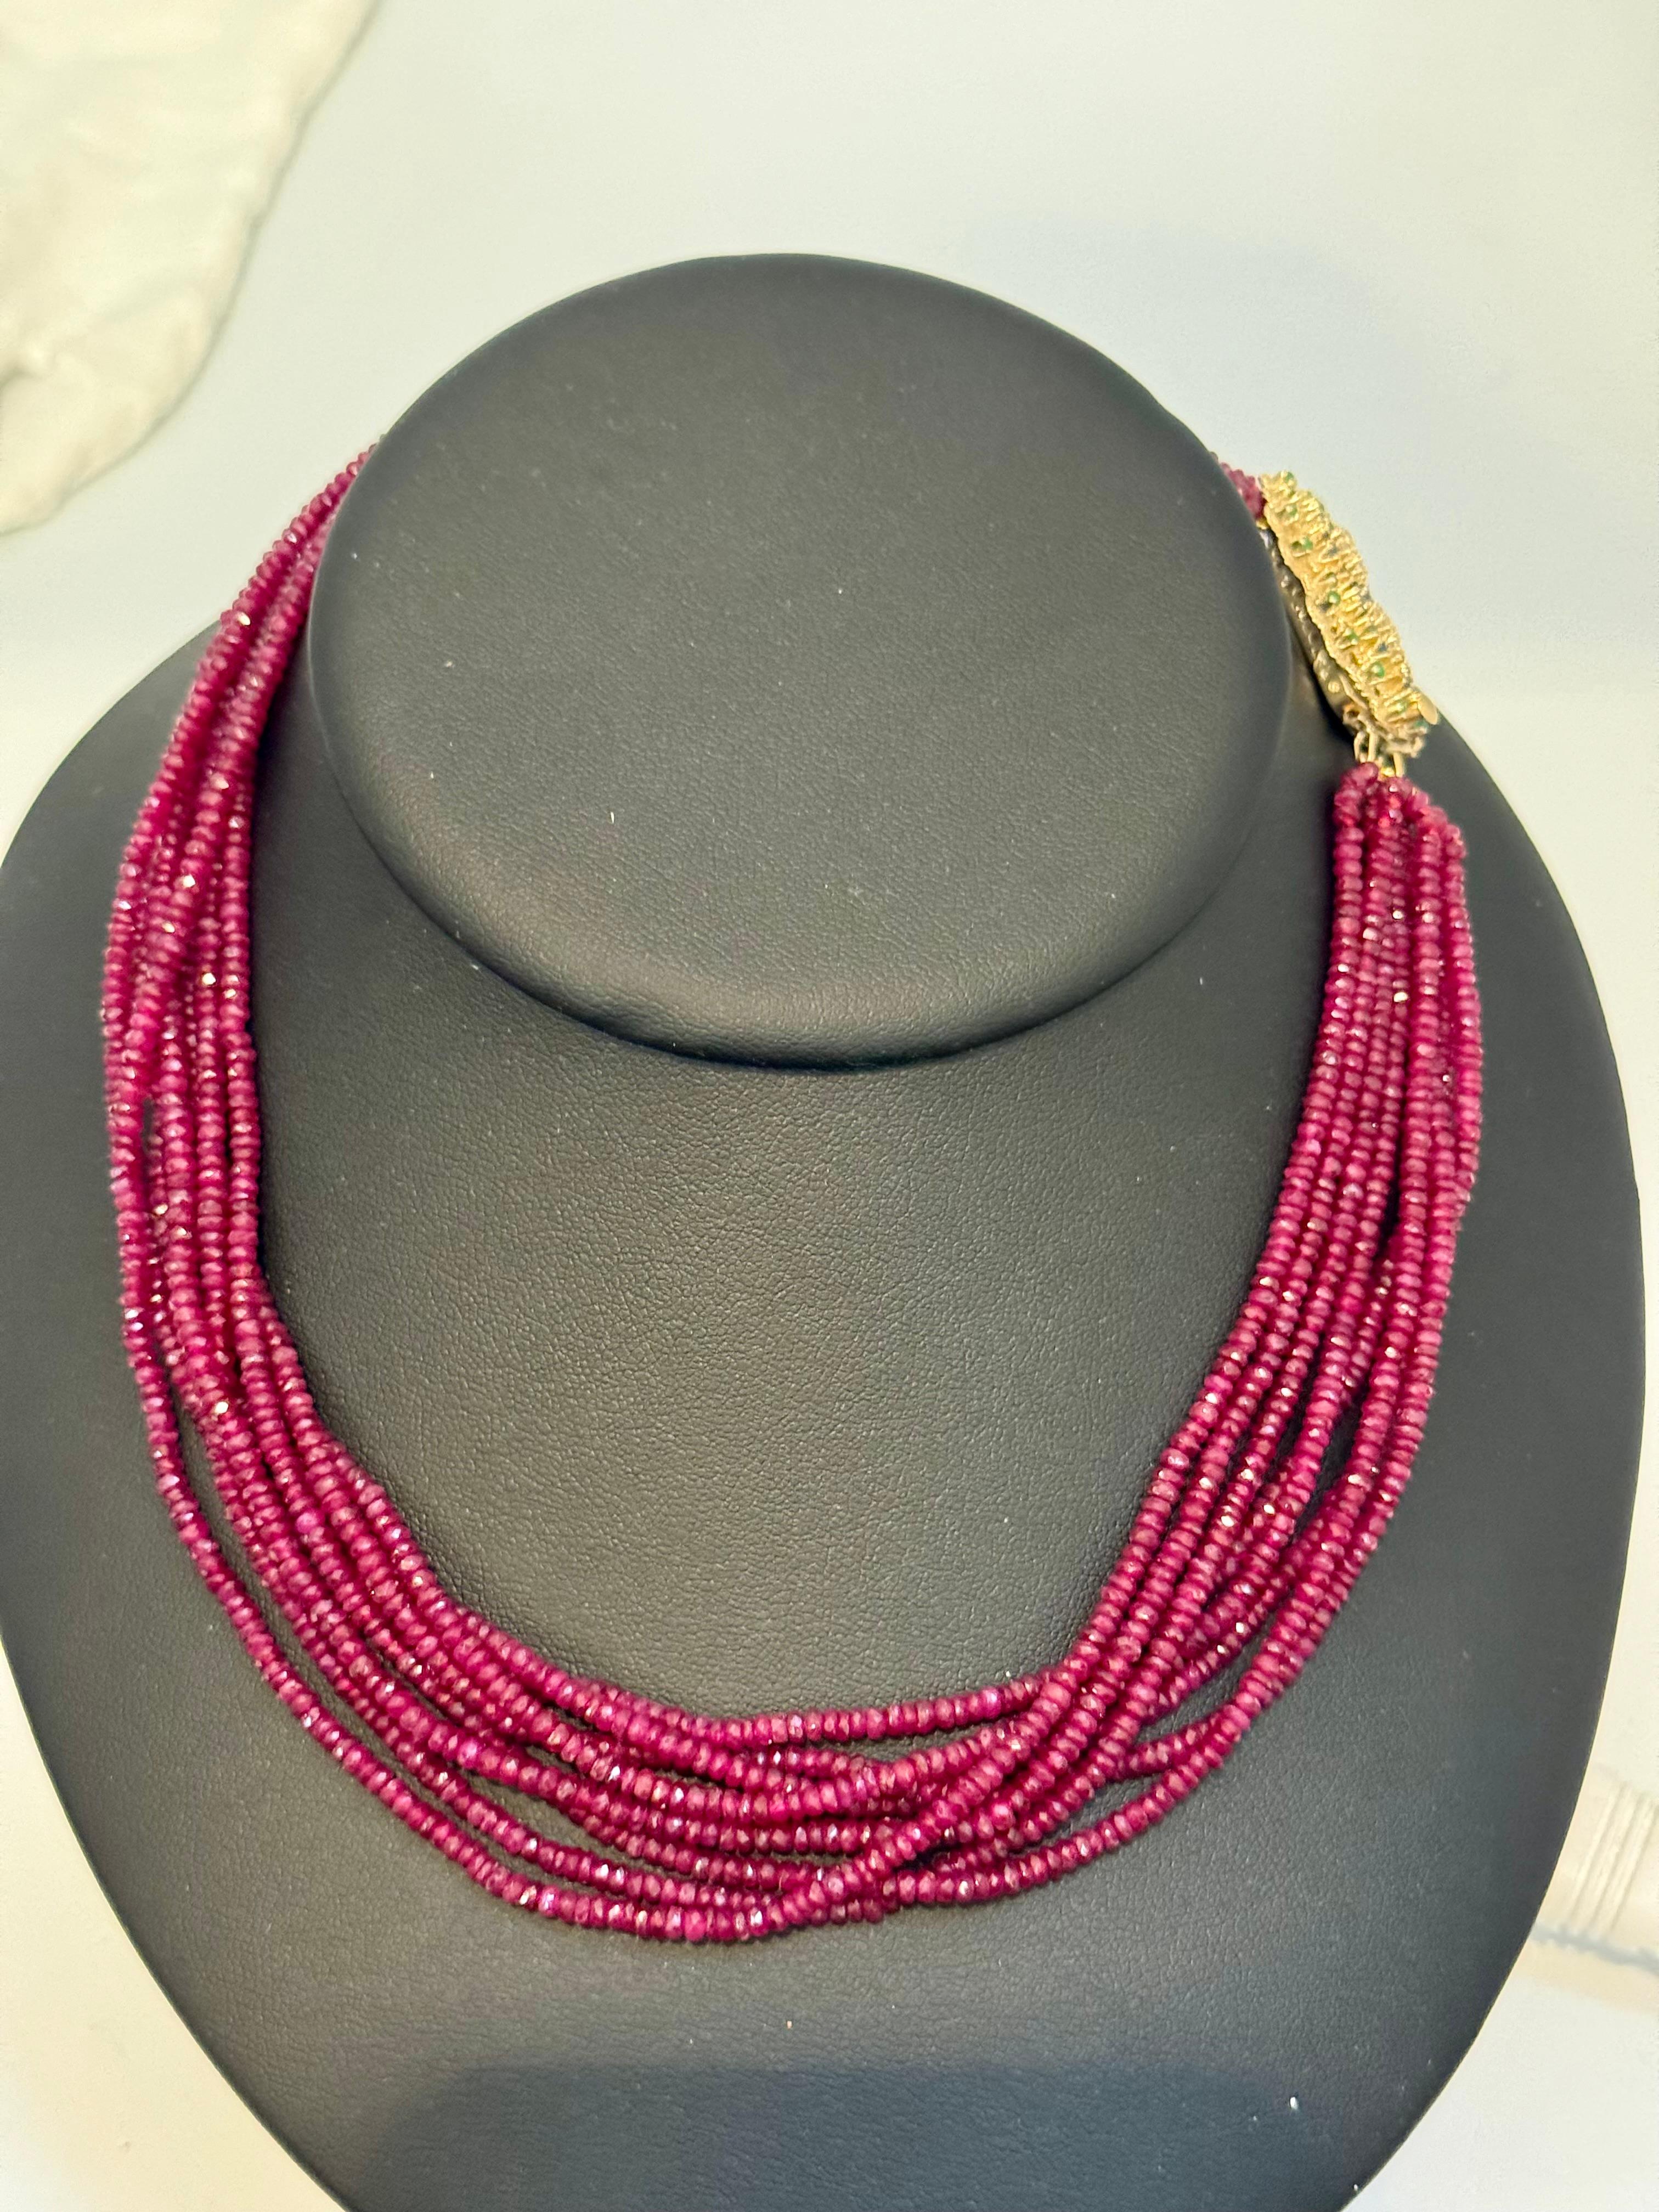 275 Ct , 8 Layer Natural Faceted Ruby Bead Necklace 14K Yellow Diamond Clasp en vente 2